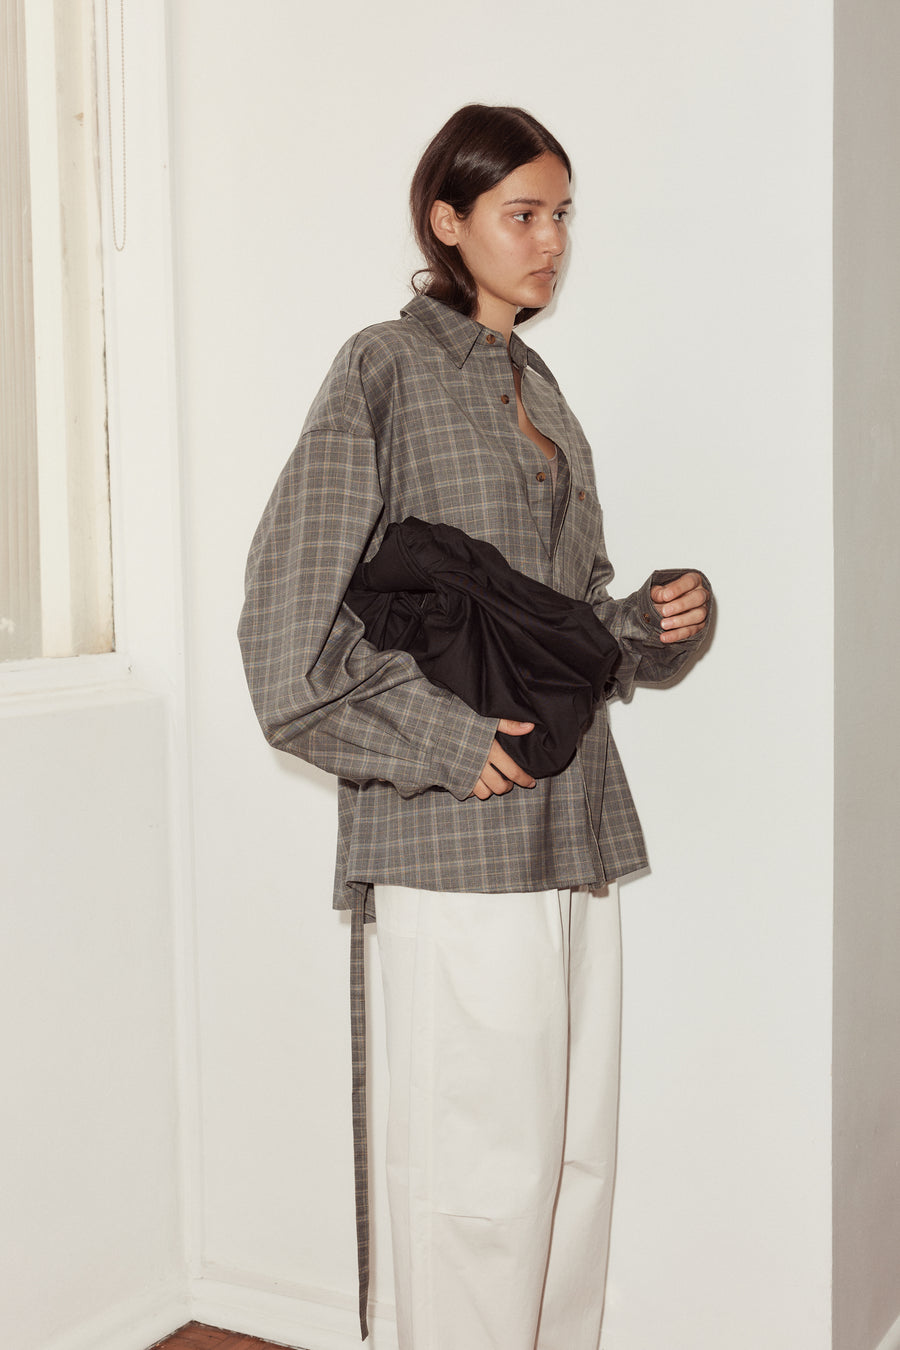 Mid shot of female model wearing the Wool Shirt in Everyday Check by Deiji Studios, holding the Bow Bag in black.